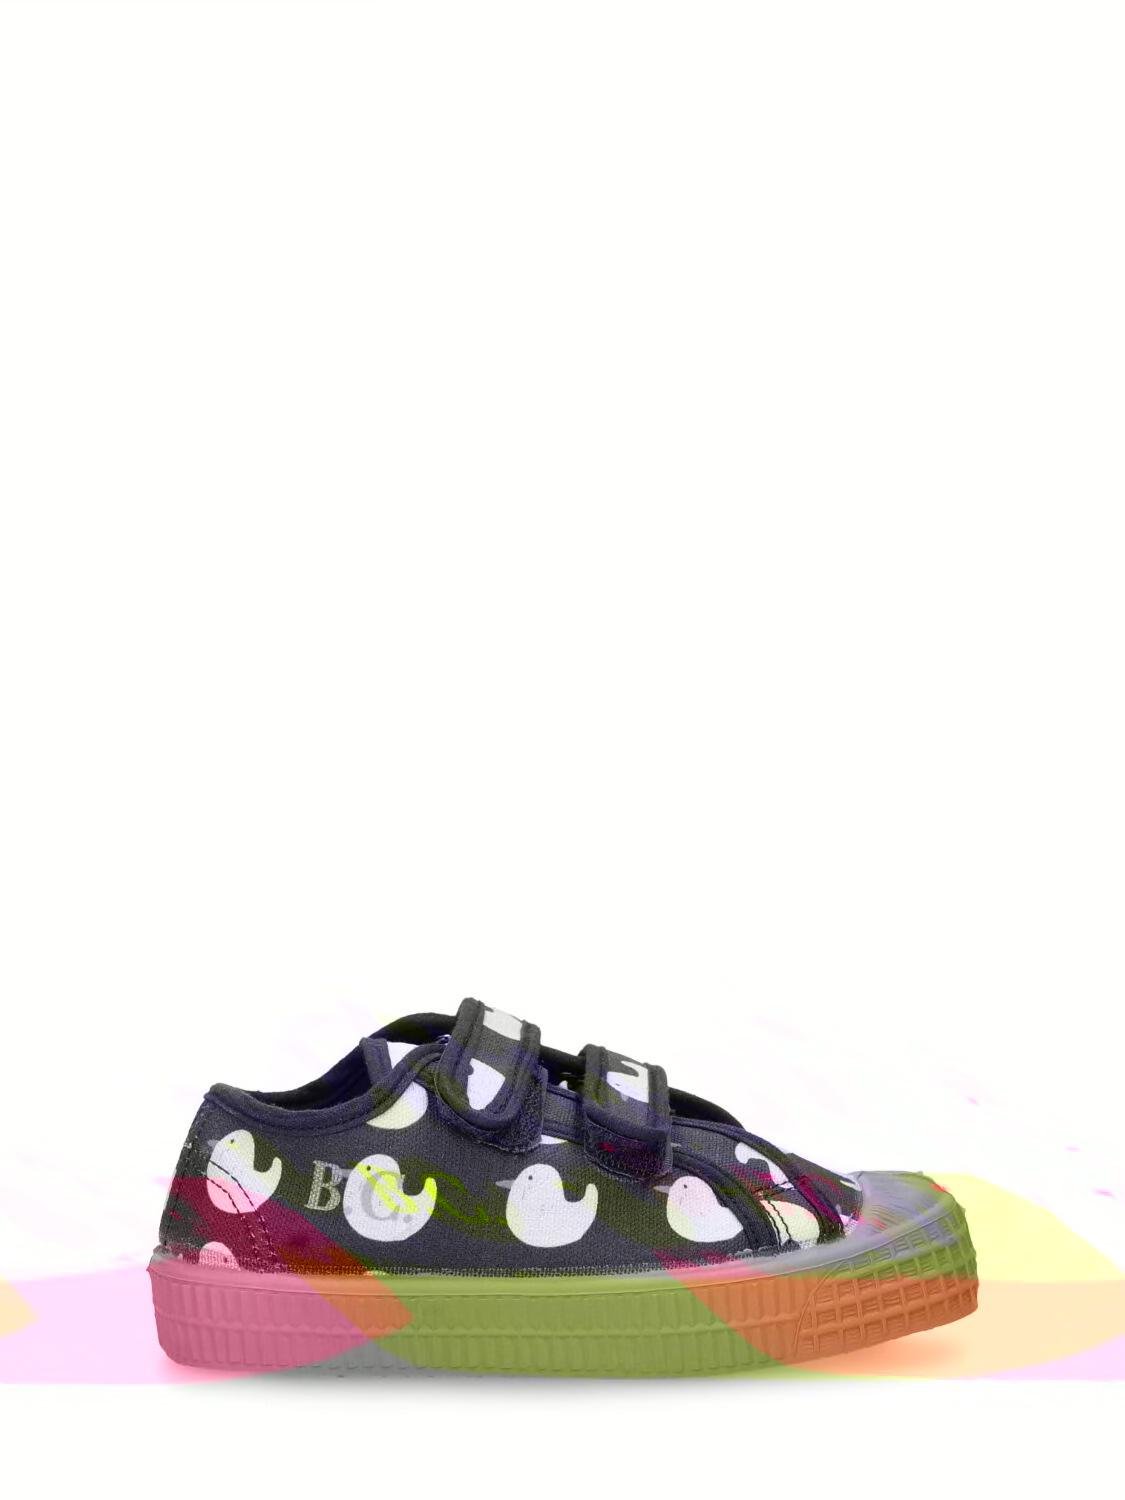 Printed Cotton Strap Sneakers by BOBO CHOSES